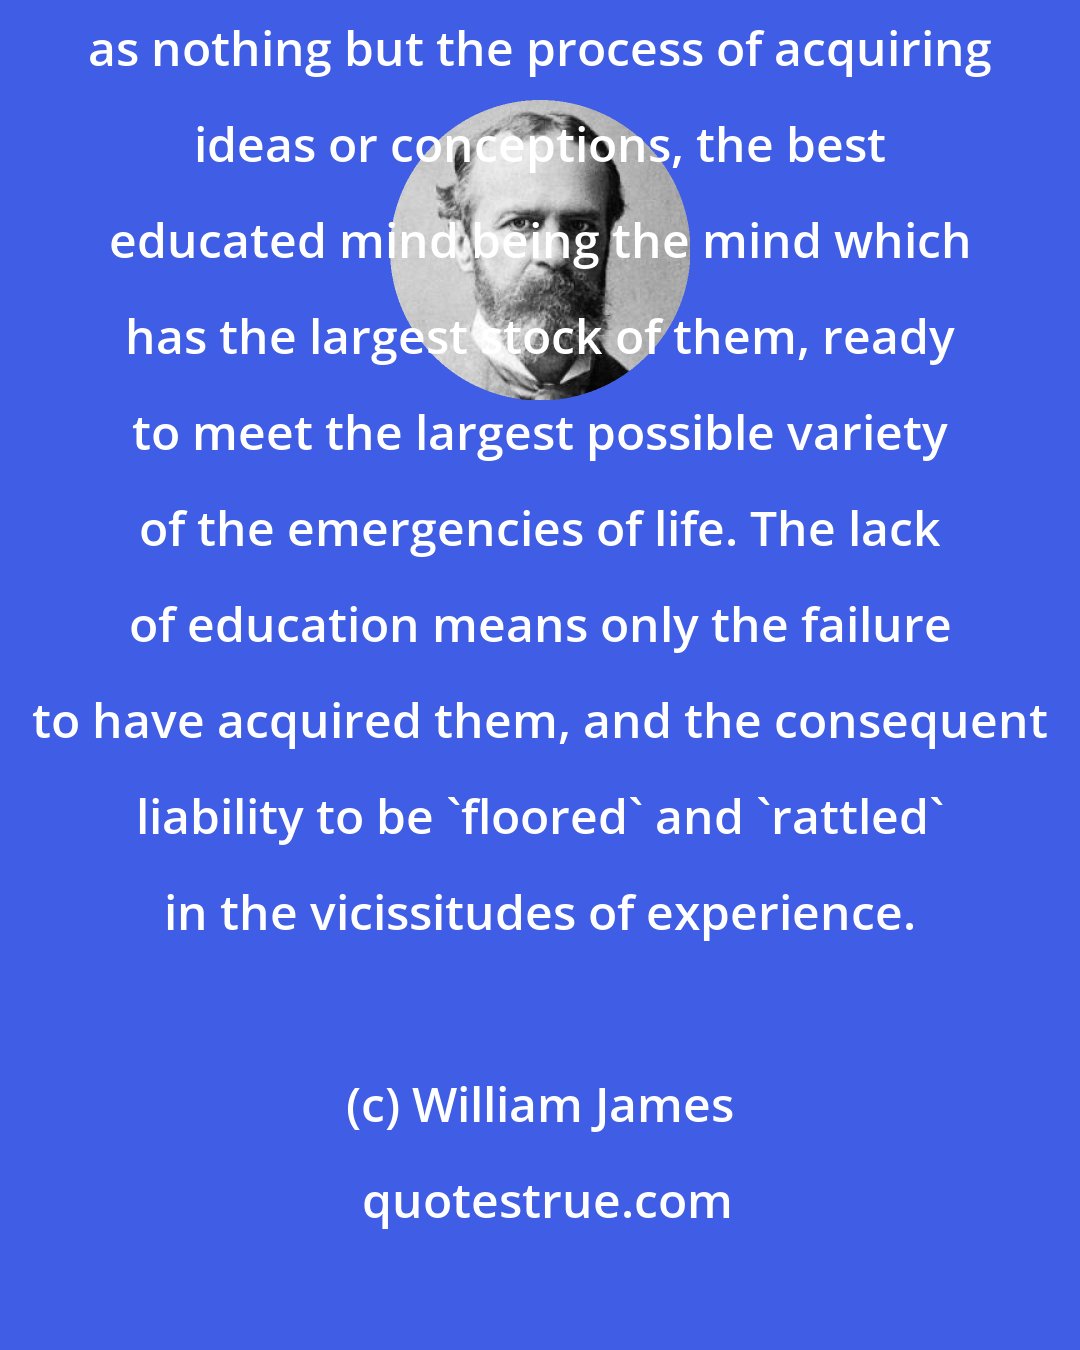 William James: So you see that the process of education, taken in a large way, may be described as nothing but the process of acquiring ideas or conceptions, the best educated mind being the mind which has the largest stock of them, ready to meet the largest possible variety of the emergencies of life. The lack of education means only the failure to have acquired them, and the consequent liability to be 'floored' and 'rattled' in the vicissitudes of experience.